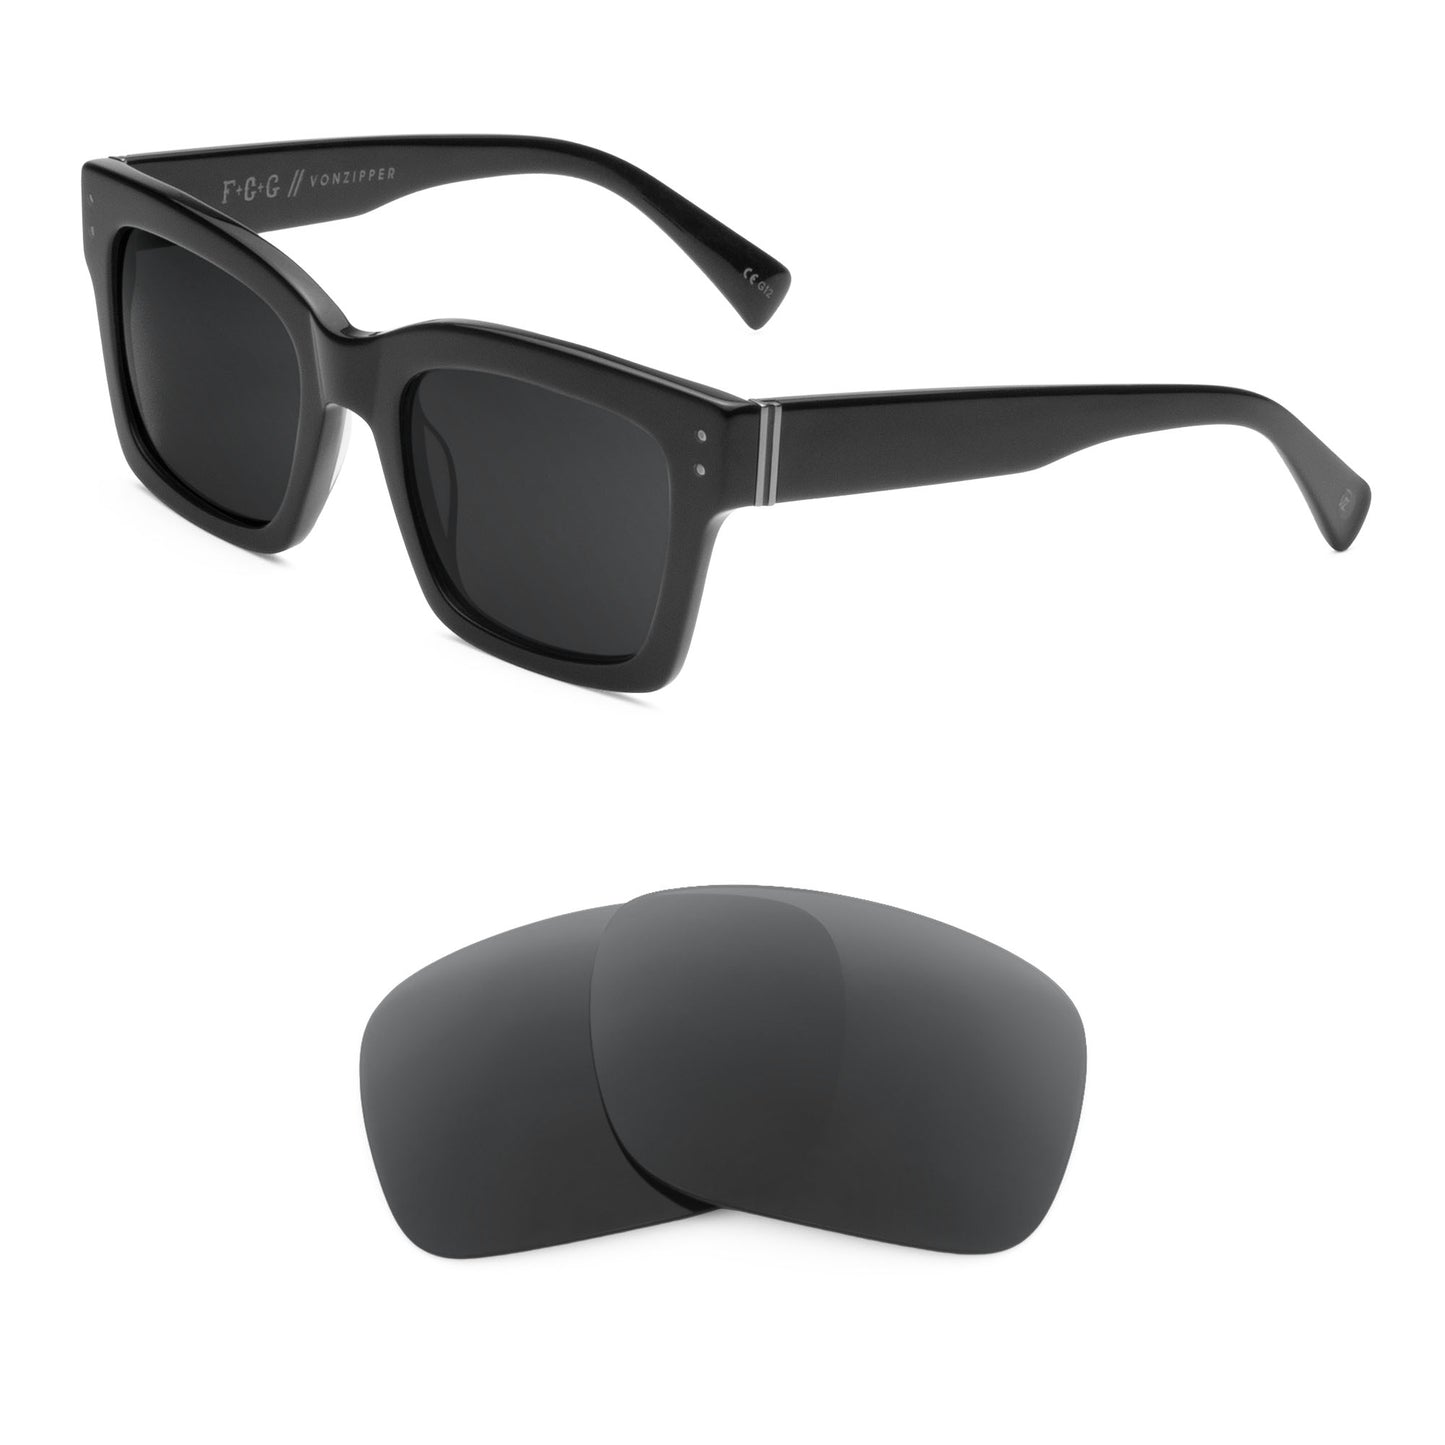 VonZipper Roscoe sunglasses with replacement lenses